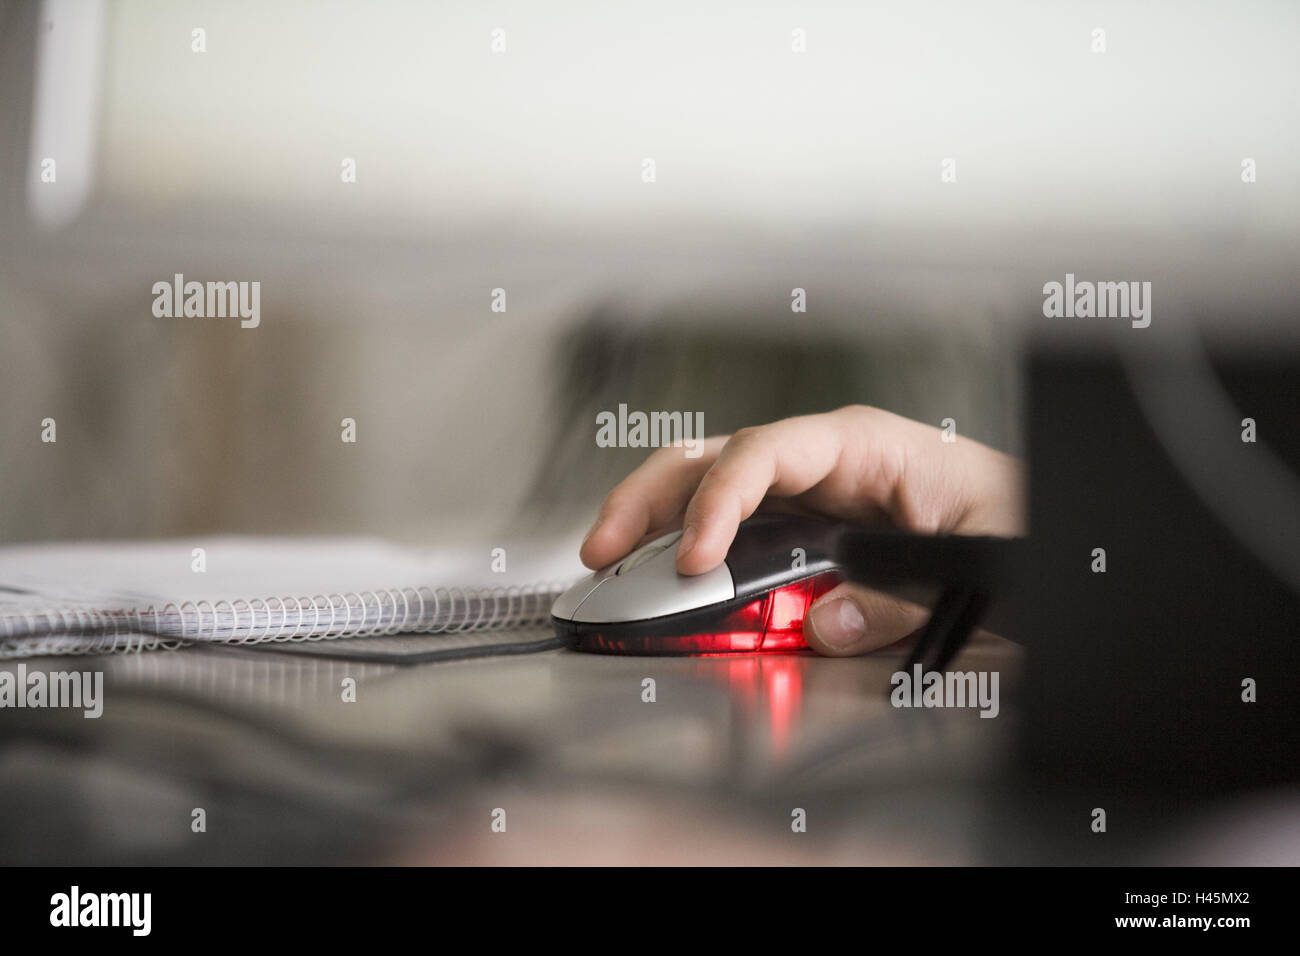 Man, detail, hand, computer mouse, fuzziness, Stock Photo